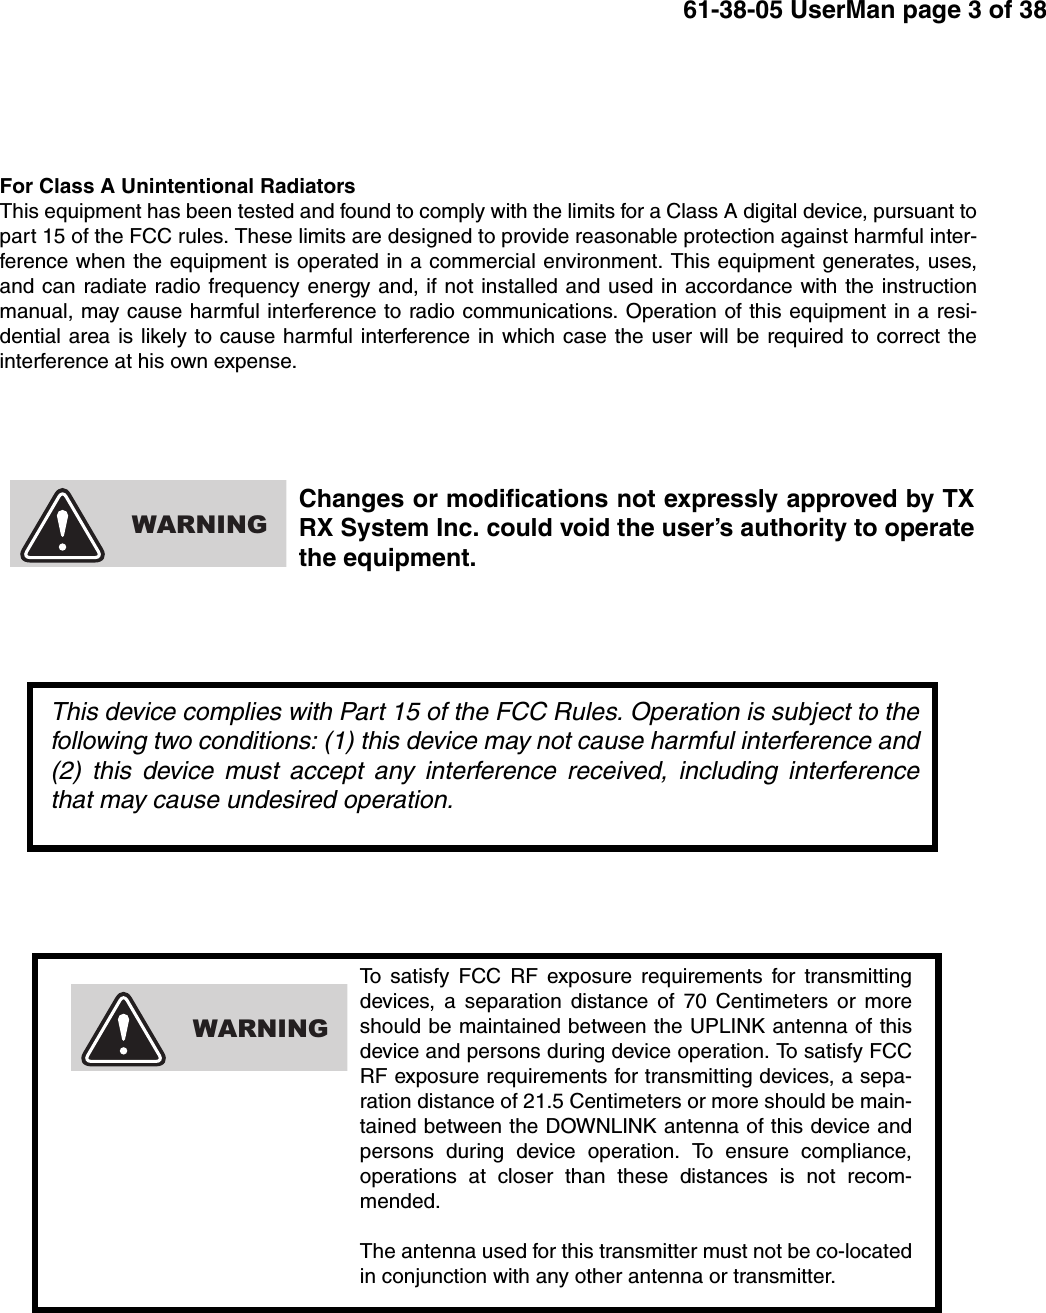 61-38-05 UserMan page 3 of 38To satisfy FCC RF exposure requirements for transmittingdevices, a separation distance of 70 Centimeters or moreshould be maintained between the UPLINK antenna of thisdevice and persons during device operation. To satisfy FCCRF exposure requirements for transmitting devices, a sepa-ration distance of 21.5 Centimeters or more should be main-tained between the DOWNLINK antenna of this device andpersons during device operation. To ensure compliance,operations at closer than these distances is not recom-mended.The antenna used for this transmitter must not be co-locatedin conjunction with any other antenna or transmitter.WARNINGFor Class A Unintentional RadiatorsThis equipment has been tested and found to comply with the limits for a Class A digital device, pursuant topart 15 of the FCC rules. These limits are designed to provide reasonable protection against harmful inter-ference when the equipment is operated in a commercial environment. This equipment generates, uses,and can radiate radio frequency energy and, if not installed and used in accordance with the instructionmanual, may cause harmful interference to radio communications. Operation of this equipment in a resi-dential area is likely to cause harmful interference in which case the user will be required to correct theinterference at his own expense.Changes or modifications not expressly approved by TXRX System Inc. could void the user’s authority to operatethe equipment.WARNINGThis device complies with Part 15 of the FCC Rules. Operation is subject to thefollowing two conditions: (1) this device may not cause harmful interference and(2) this device must accept any interference received, including interferencethat may cause undesired operation.